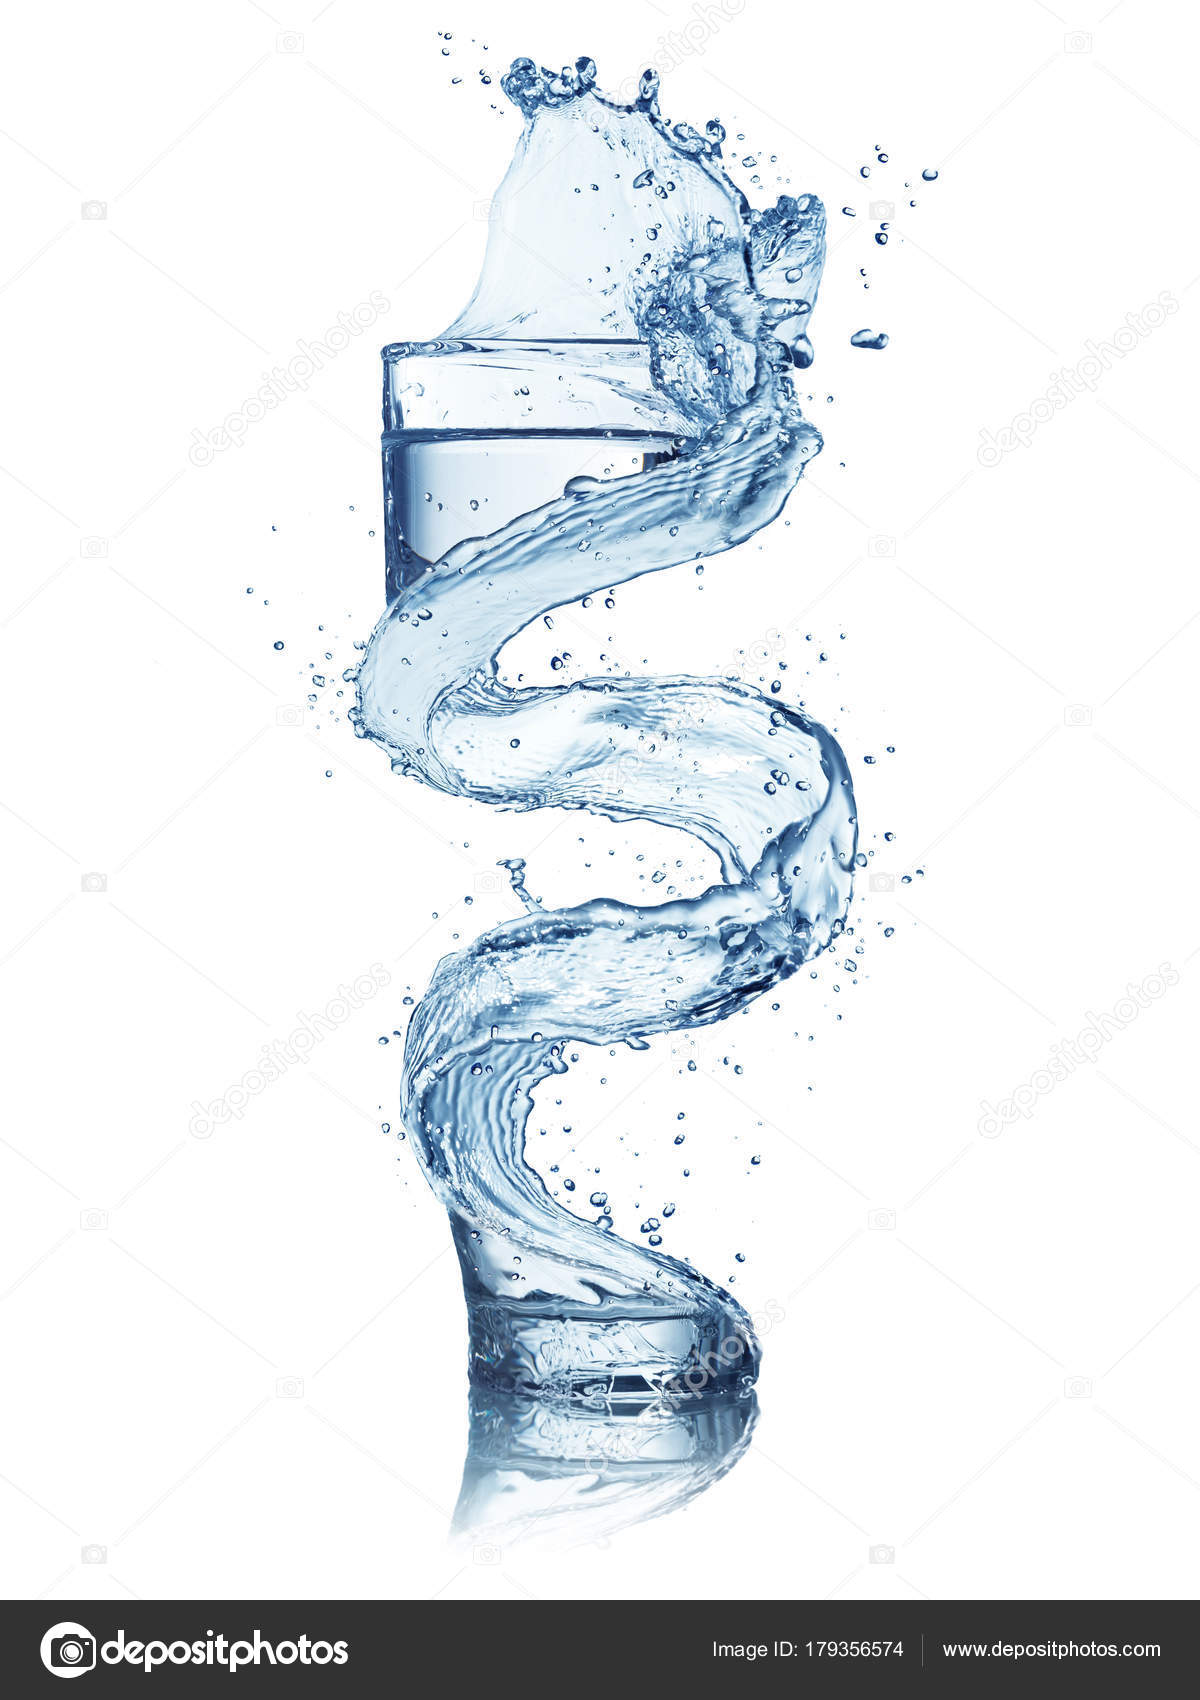 Abstract shape of water splash with glass, isolated on white bac ...